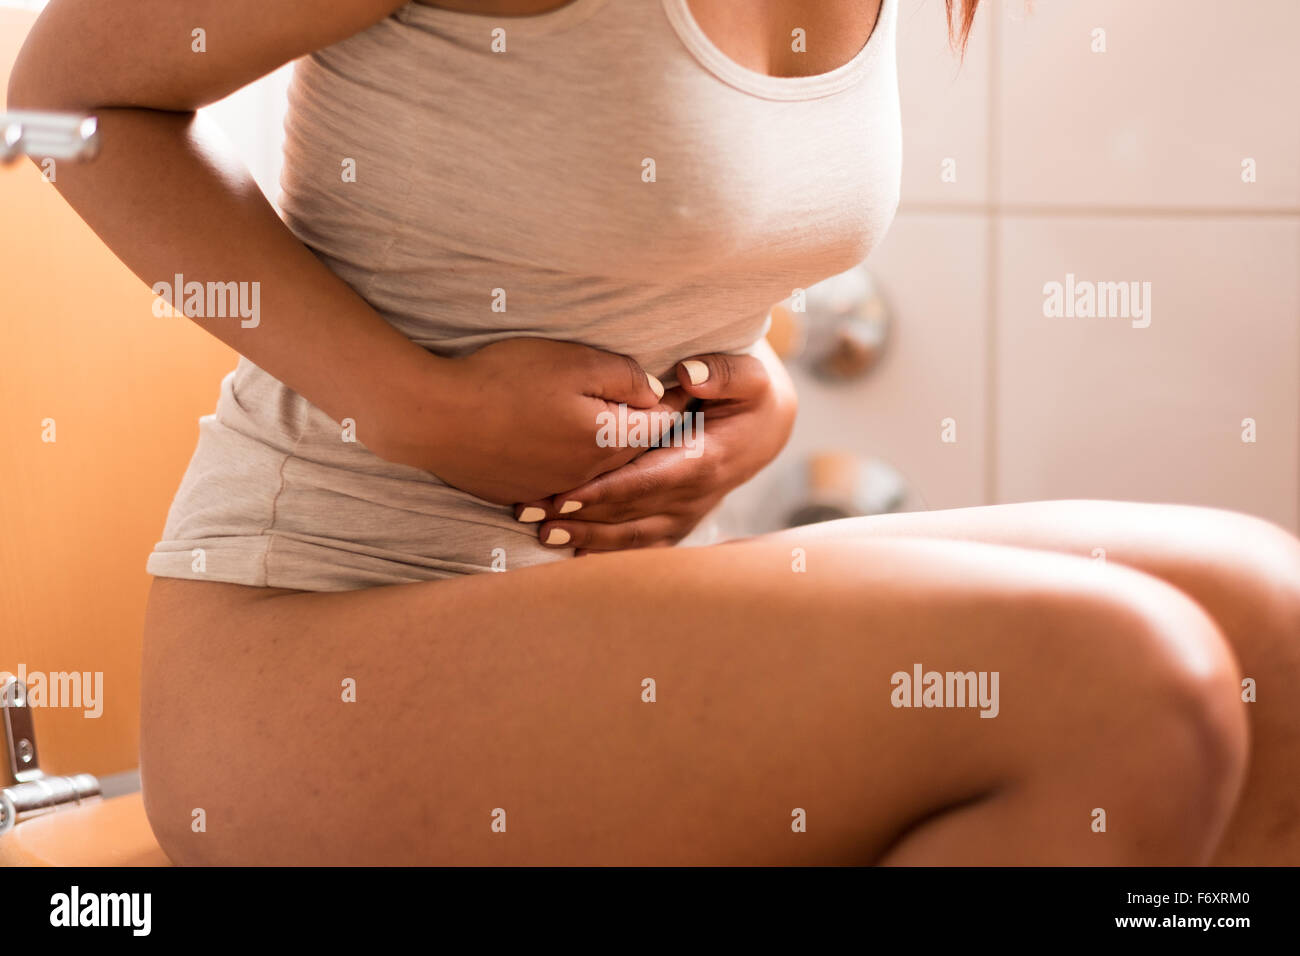 Close up Sick Young Woman Sitting on the Toilet in the Bathroom While Holding her Painful Stomach Stock Photo